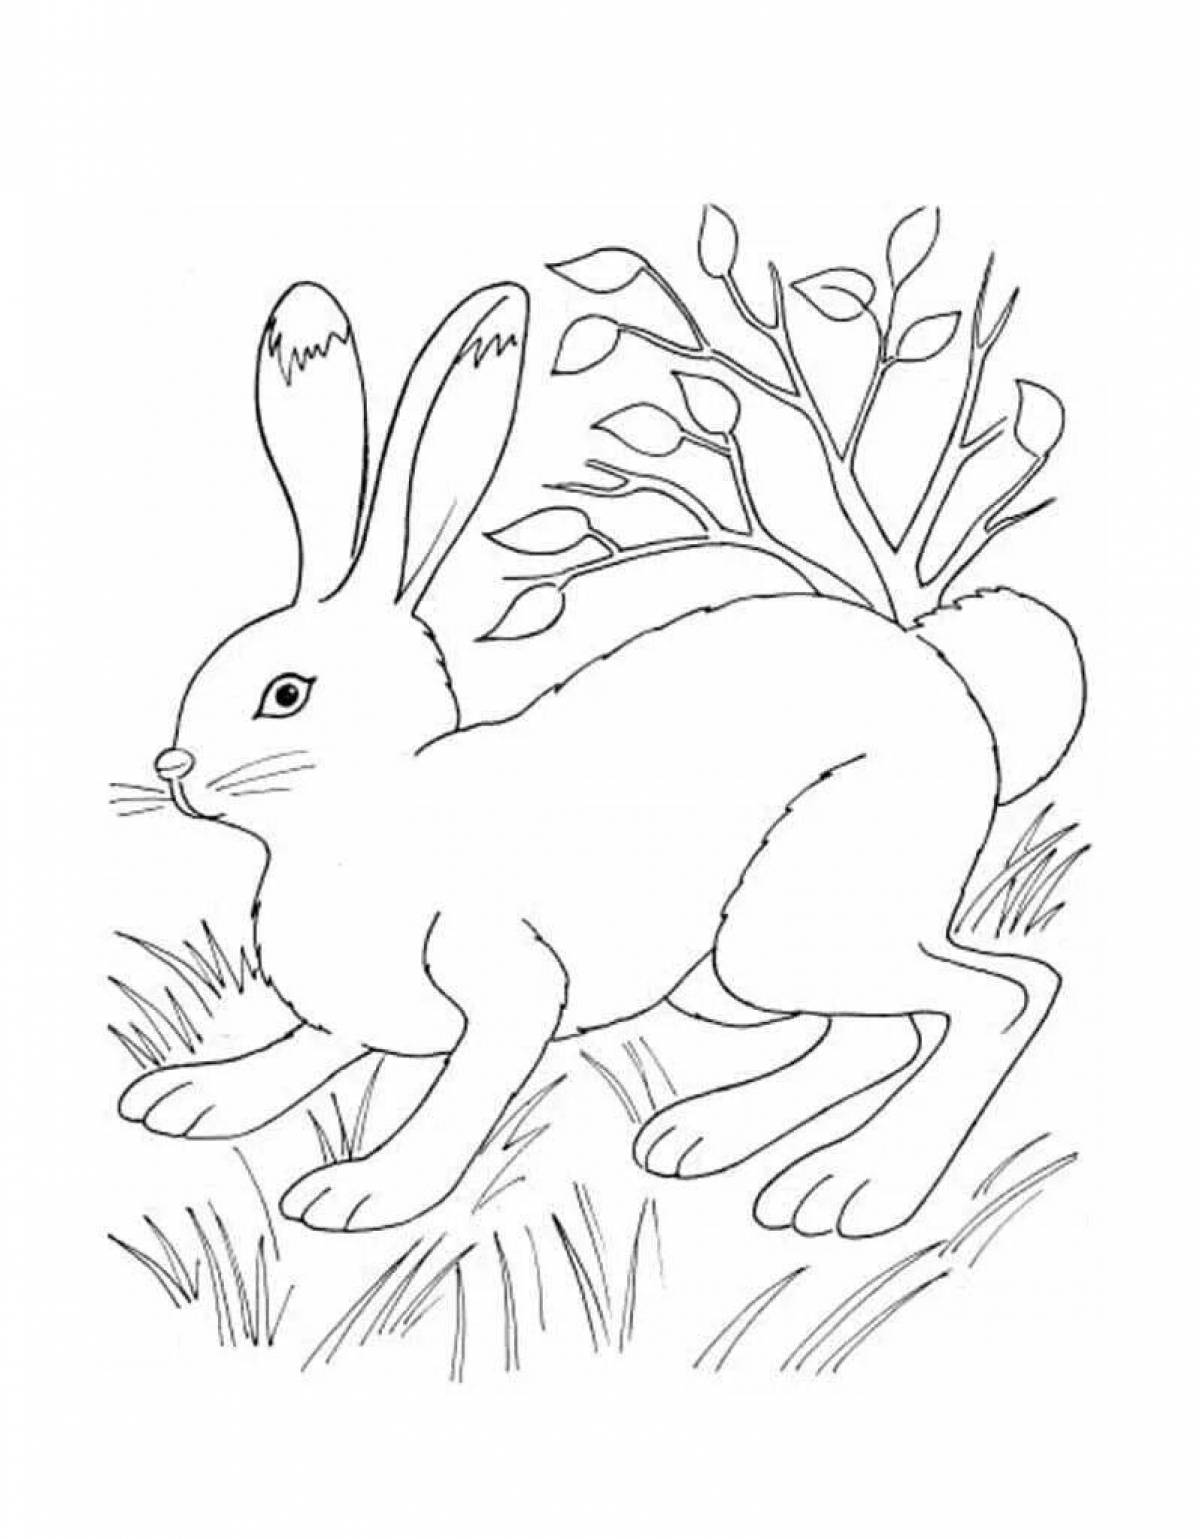 Adorable forest animals coloring book for kids